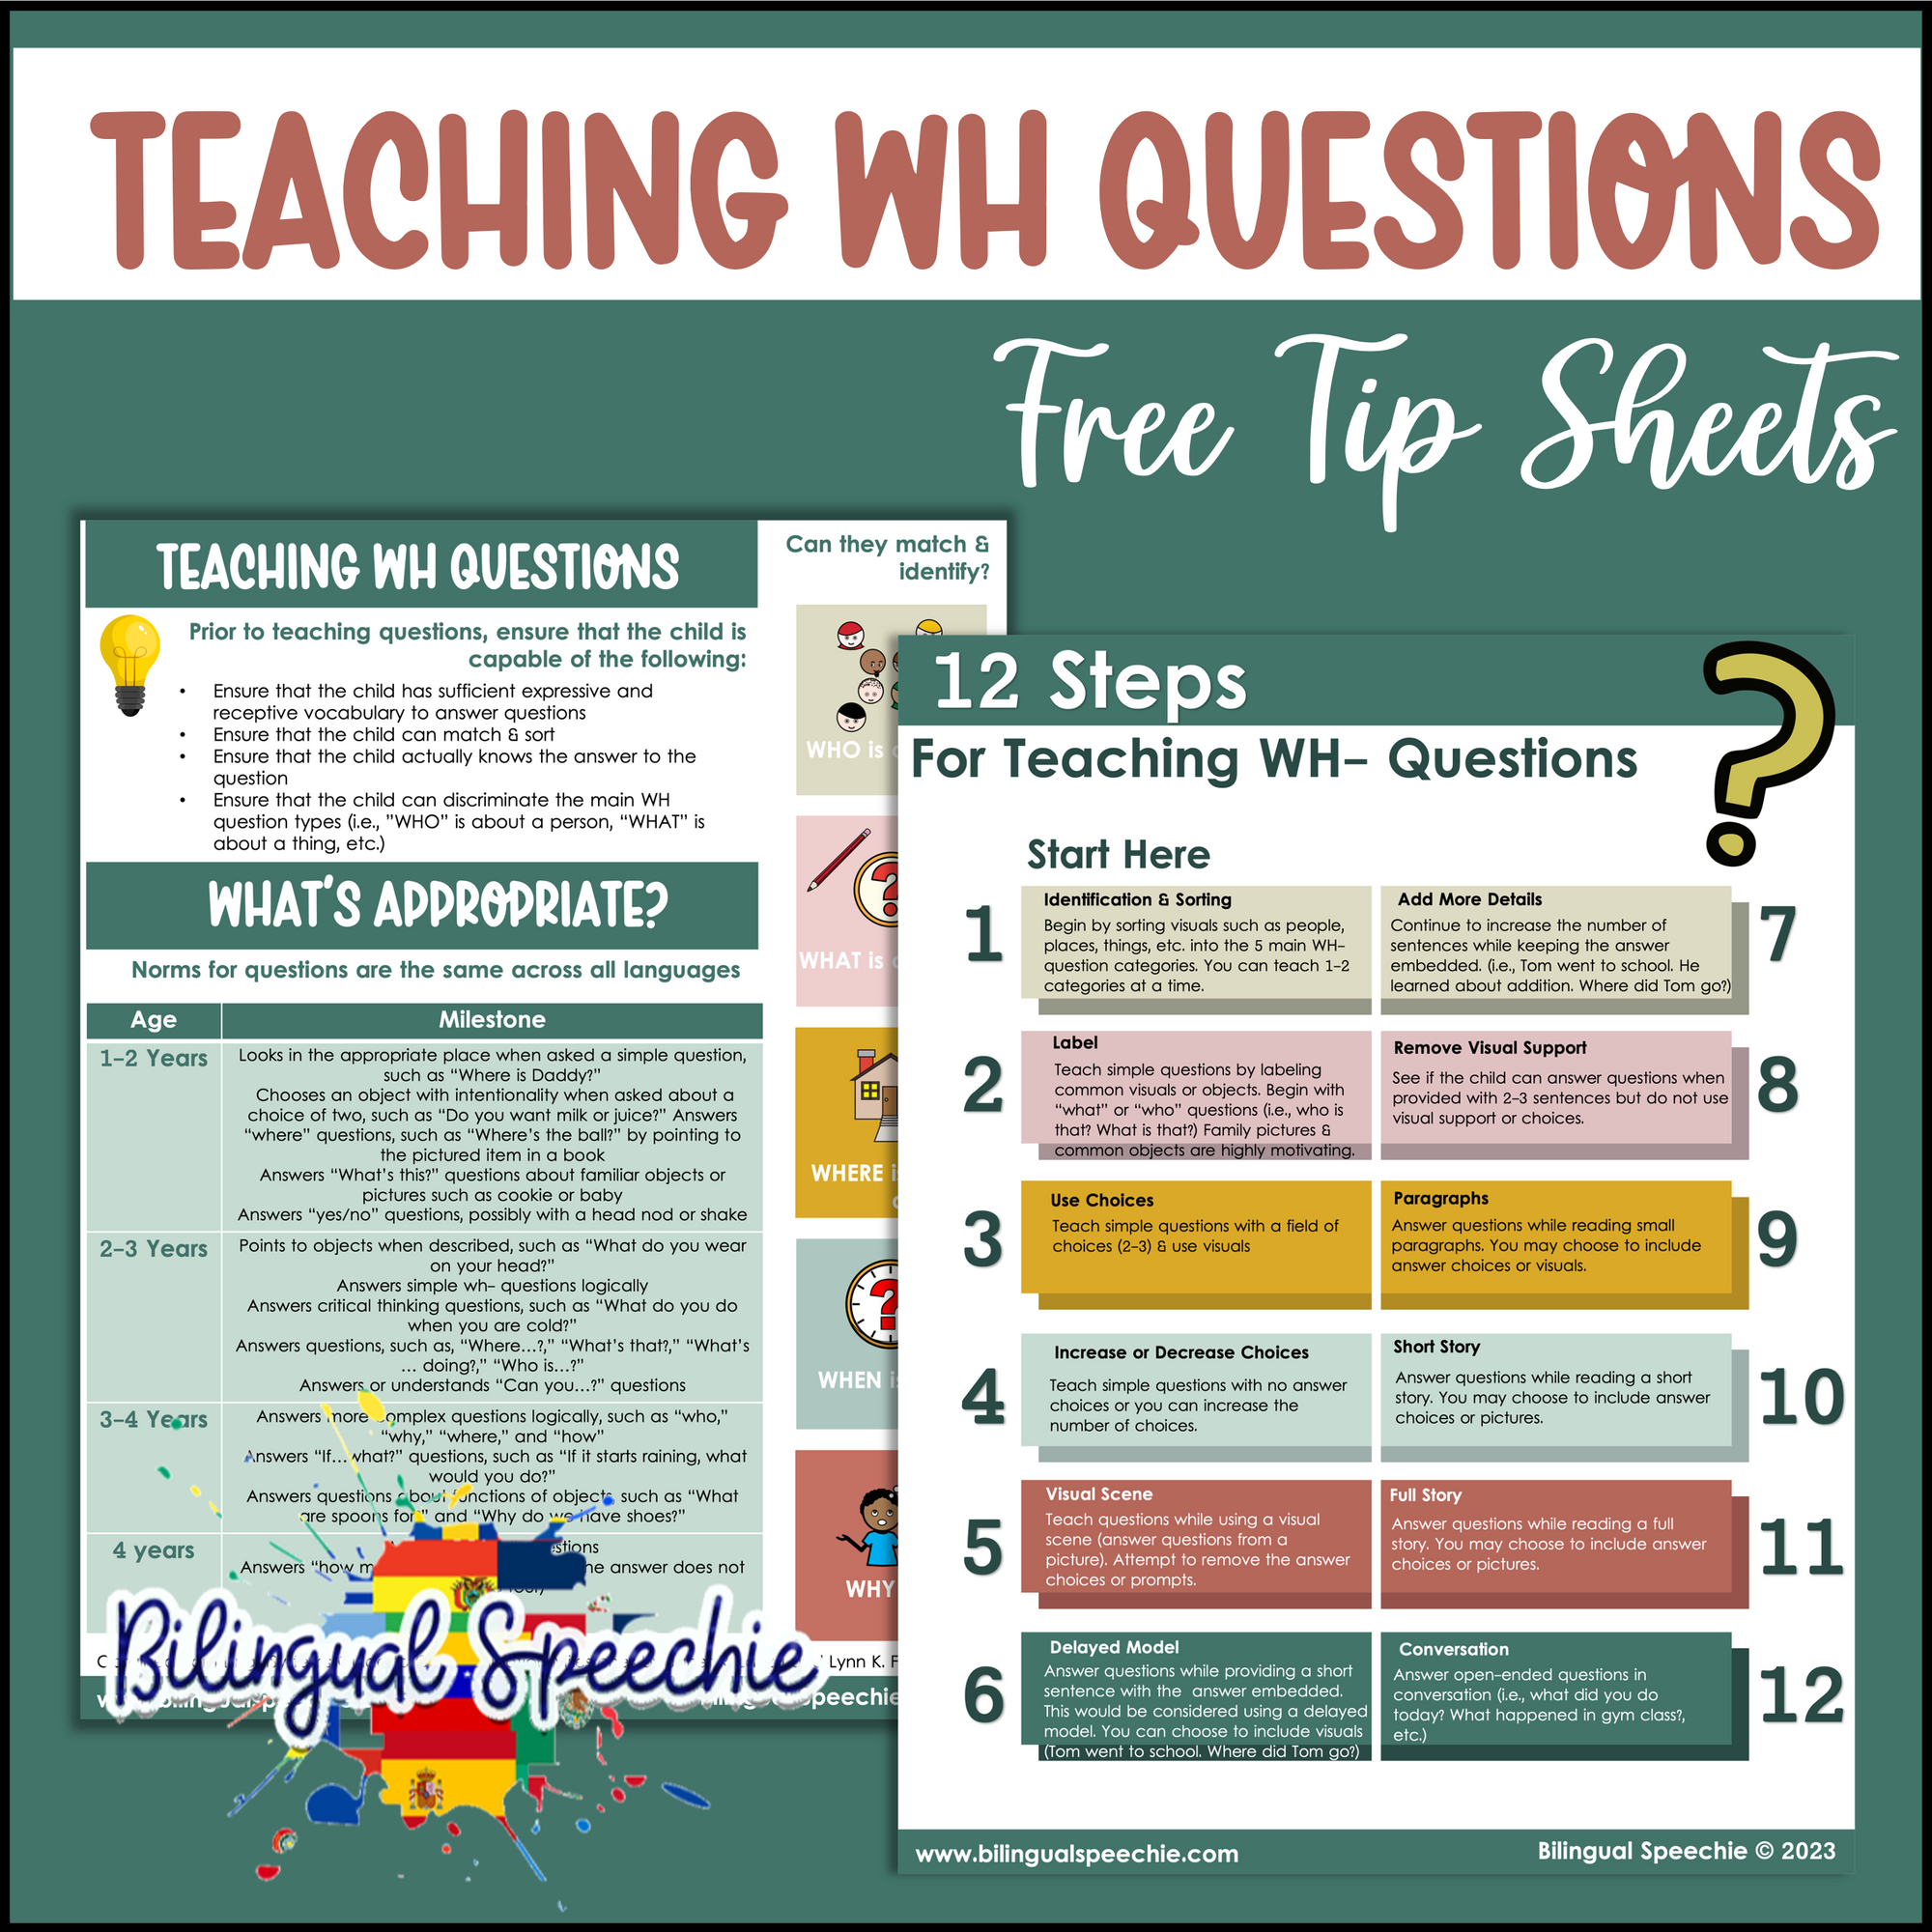 Teaching WH- Questions Free Tips Sheets